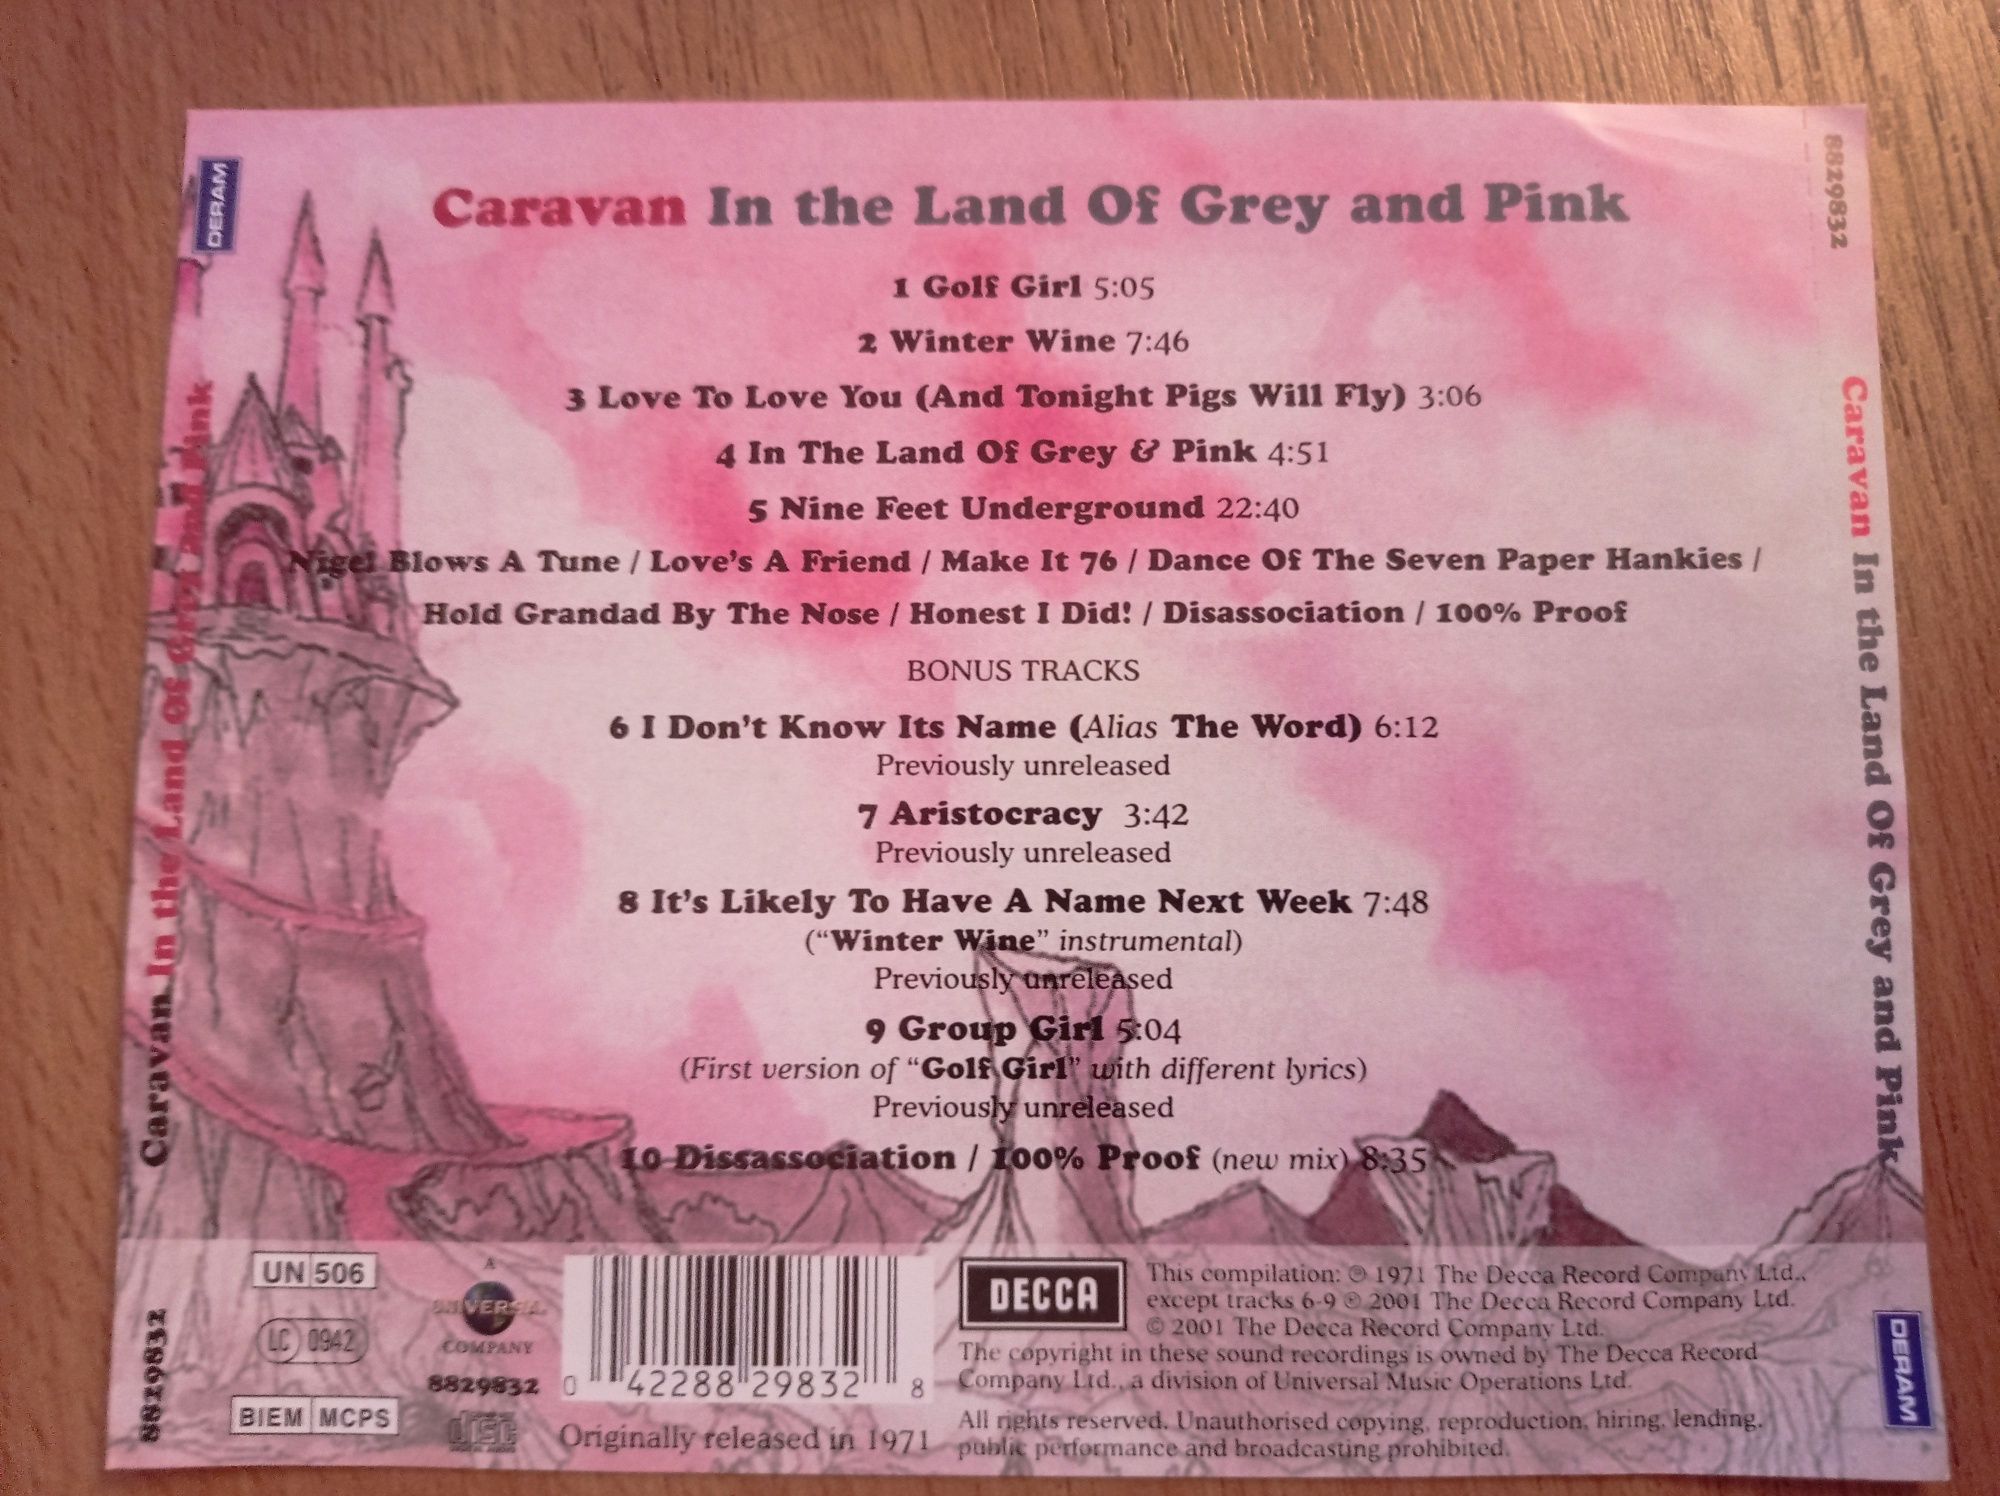 Caravan - On The land of grey and pink